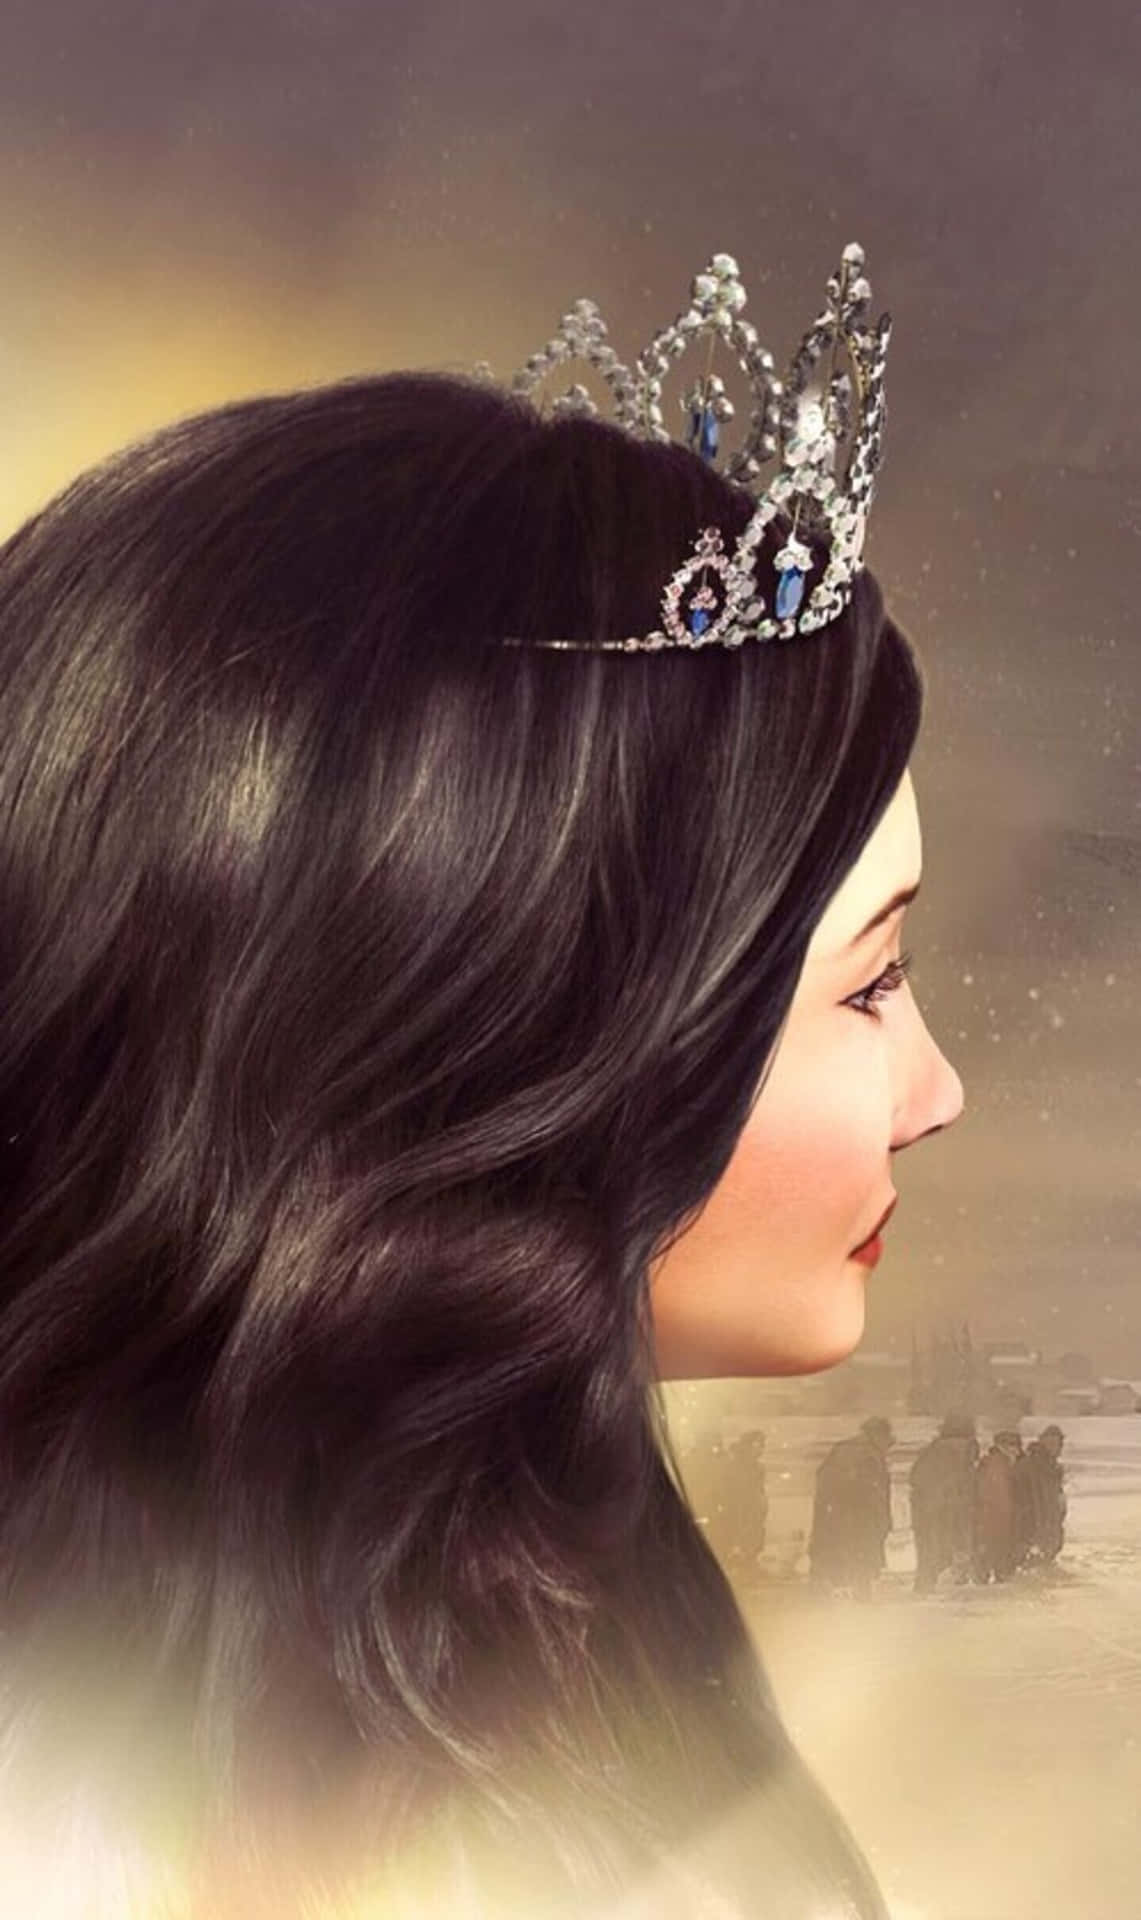 A Woman With Long Hair Is Wearing A Tiara